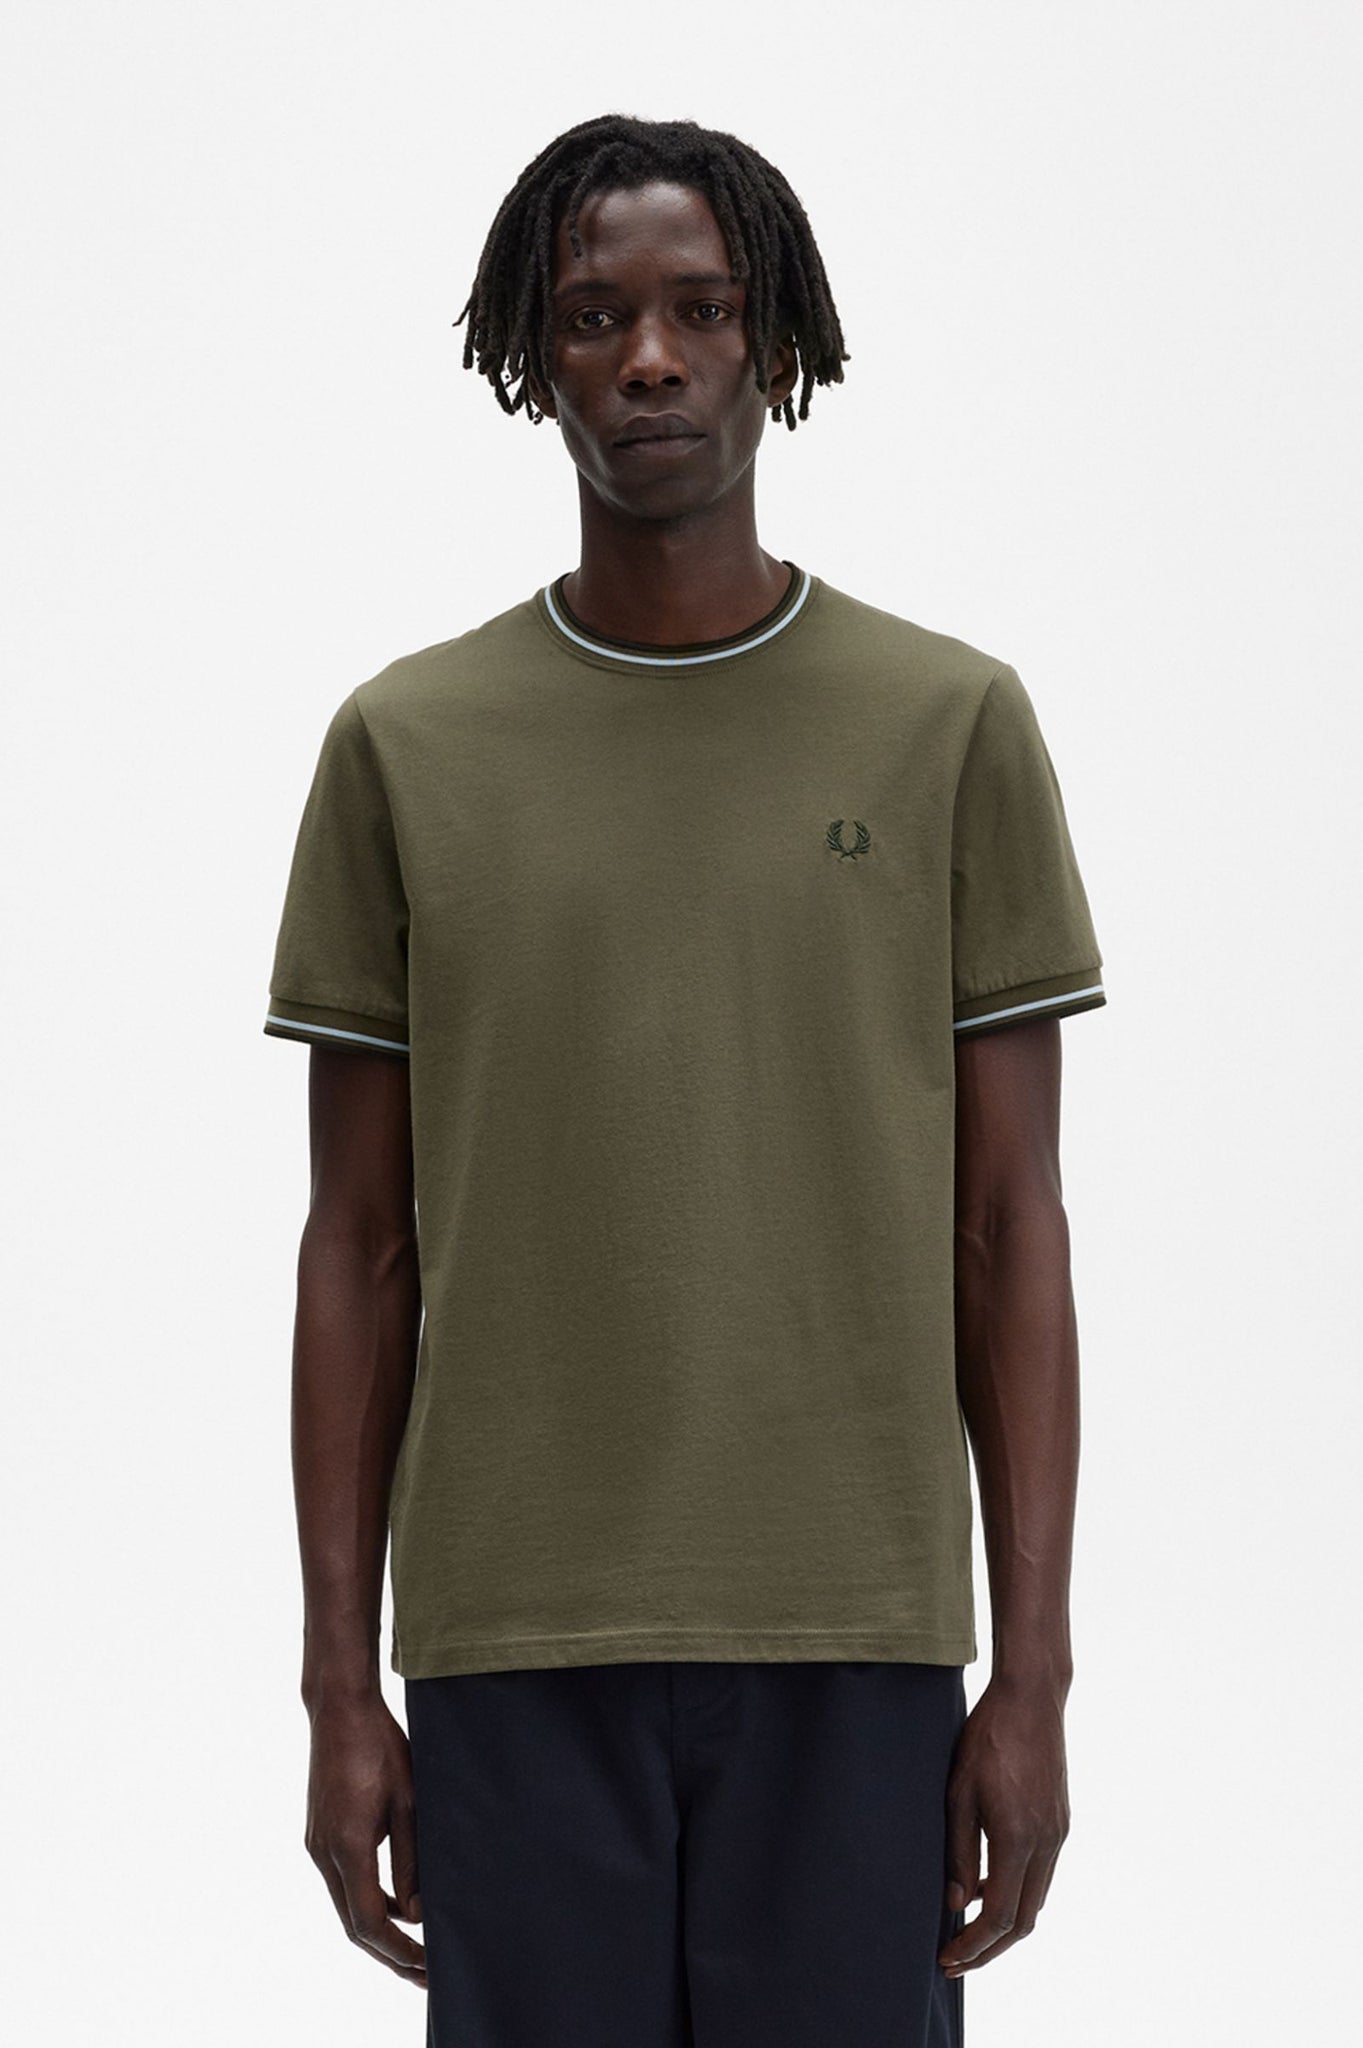 M1588 TWIN TIPPED FRED PERRY T-SHIRT - R79 UNIFORM GREEN